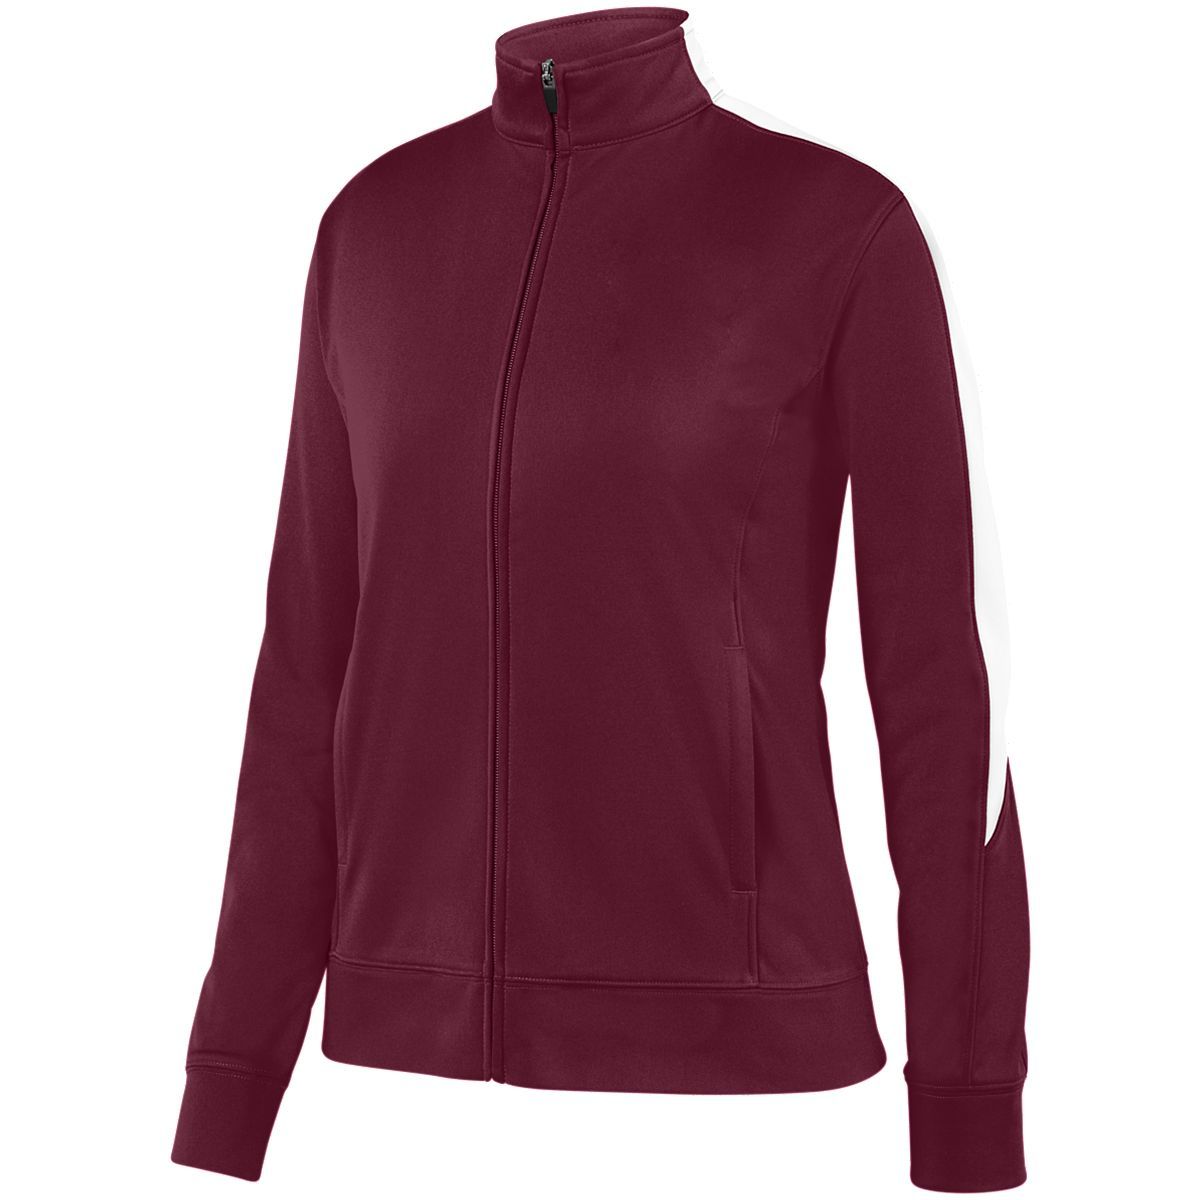 Augusta Sportswear Ladies Medalist Jacket 2.0 in Maroon/White  -Part of the Ladies, Ladies-Jacket, Augusta-Products, Outerwear product lines at KanaleyCreations.com